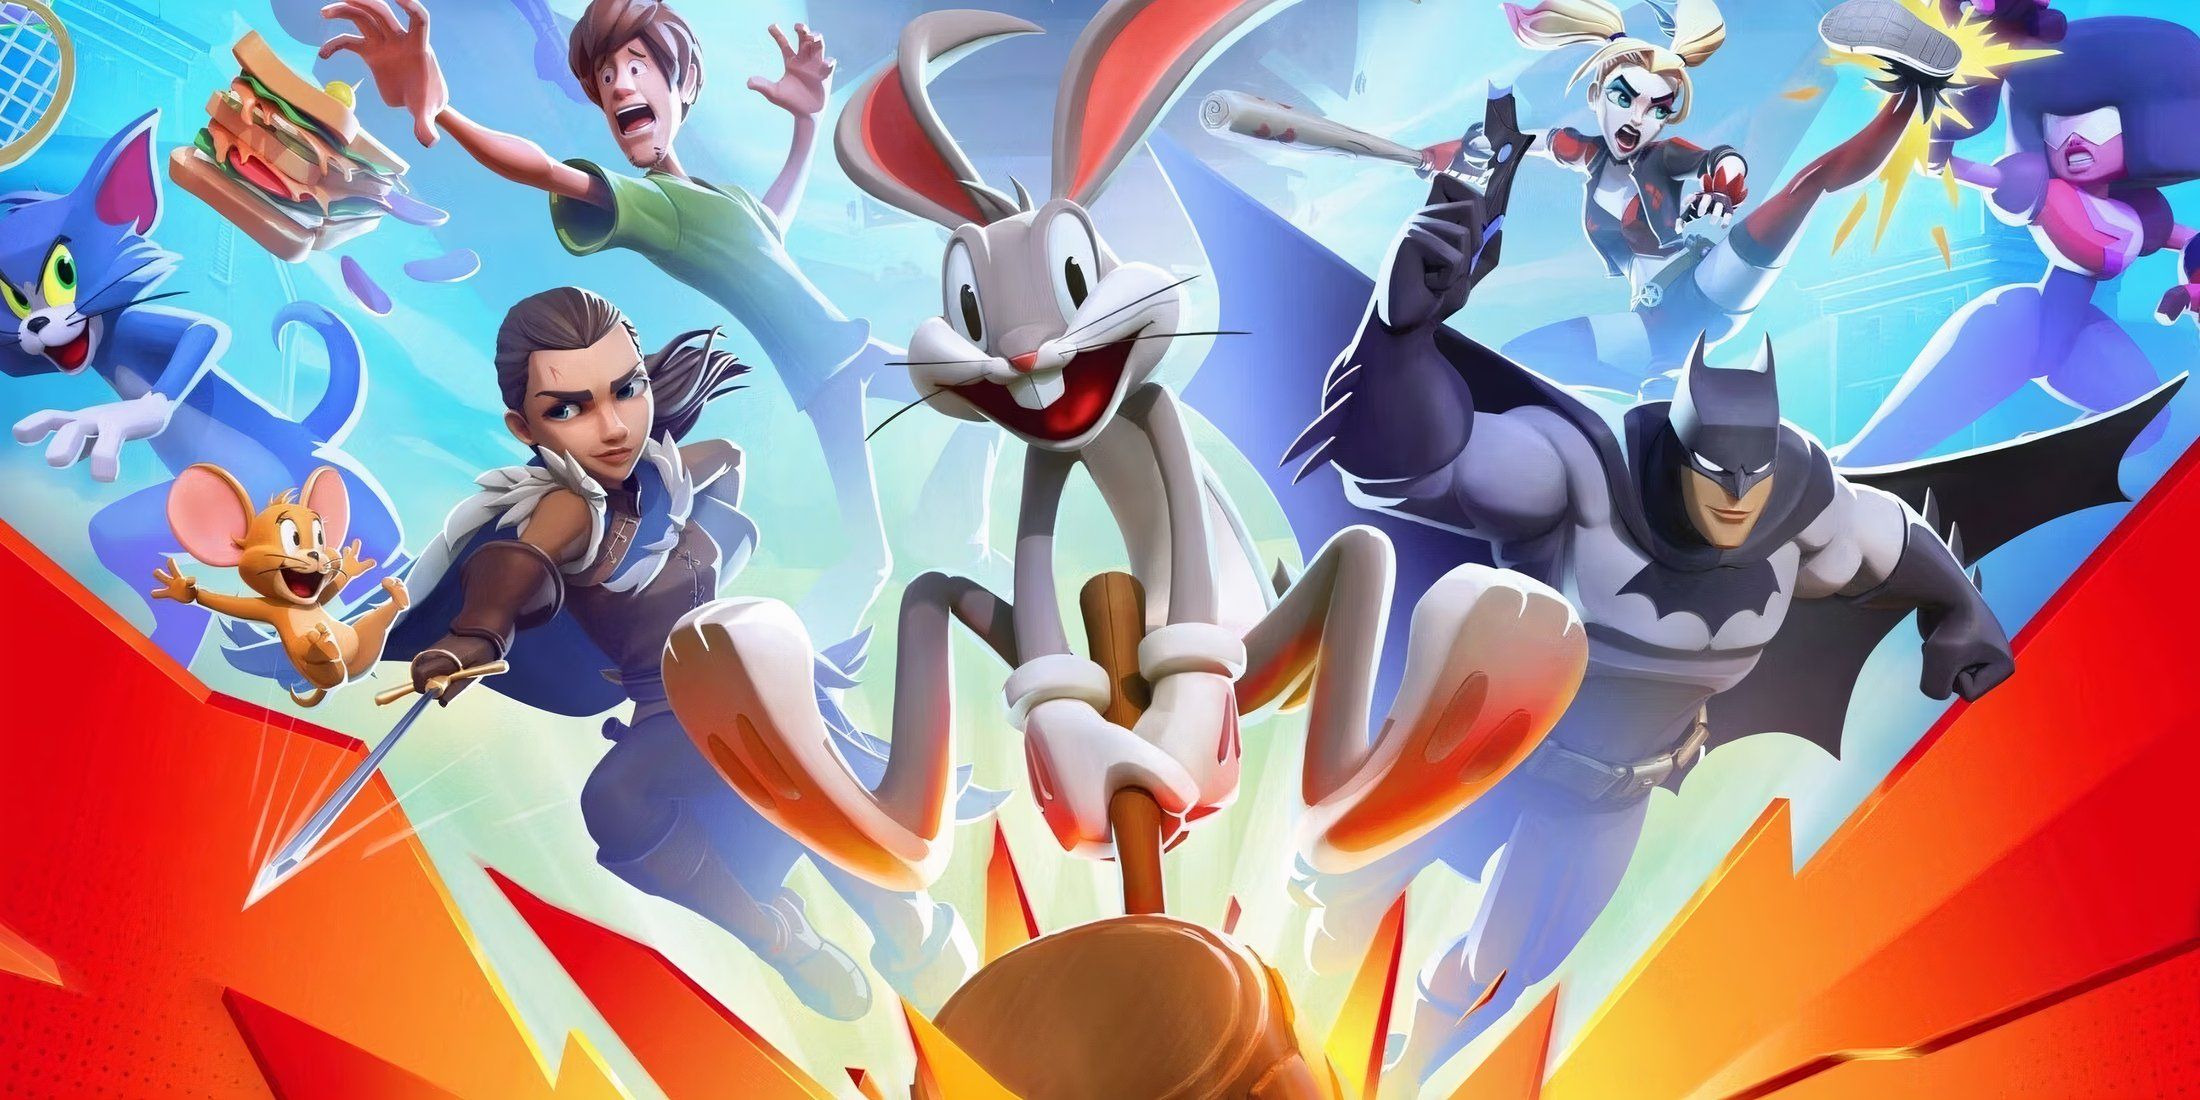 Multiversus characters with Bugs Bunny at center